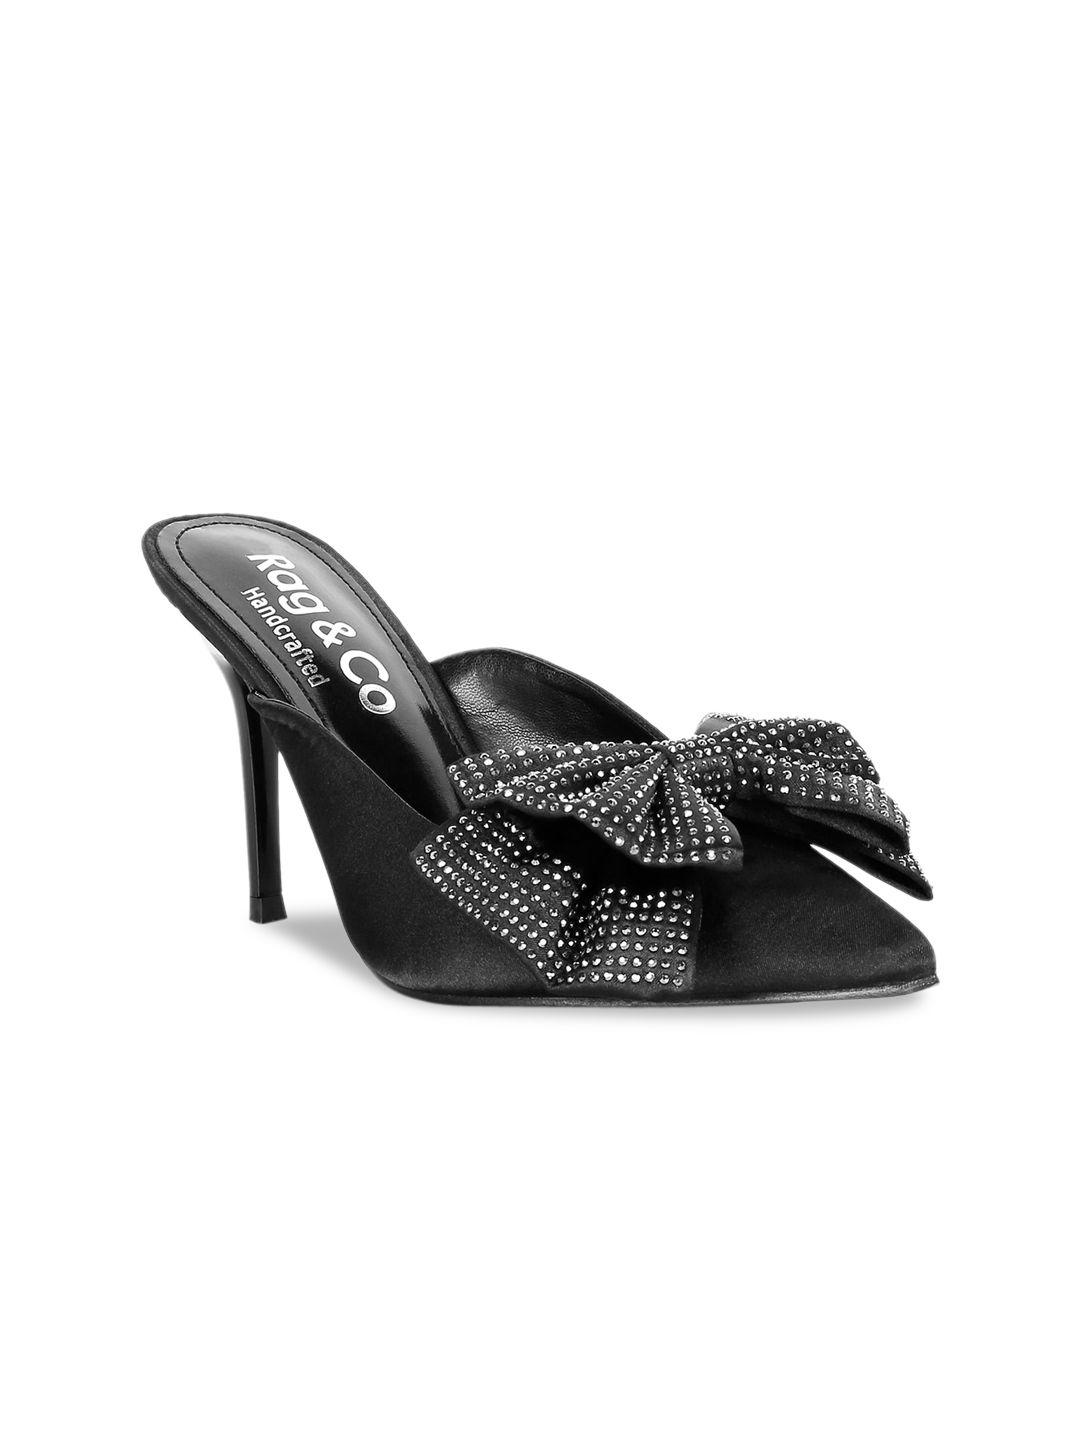 rag & co black party stiletto pumps with bows